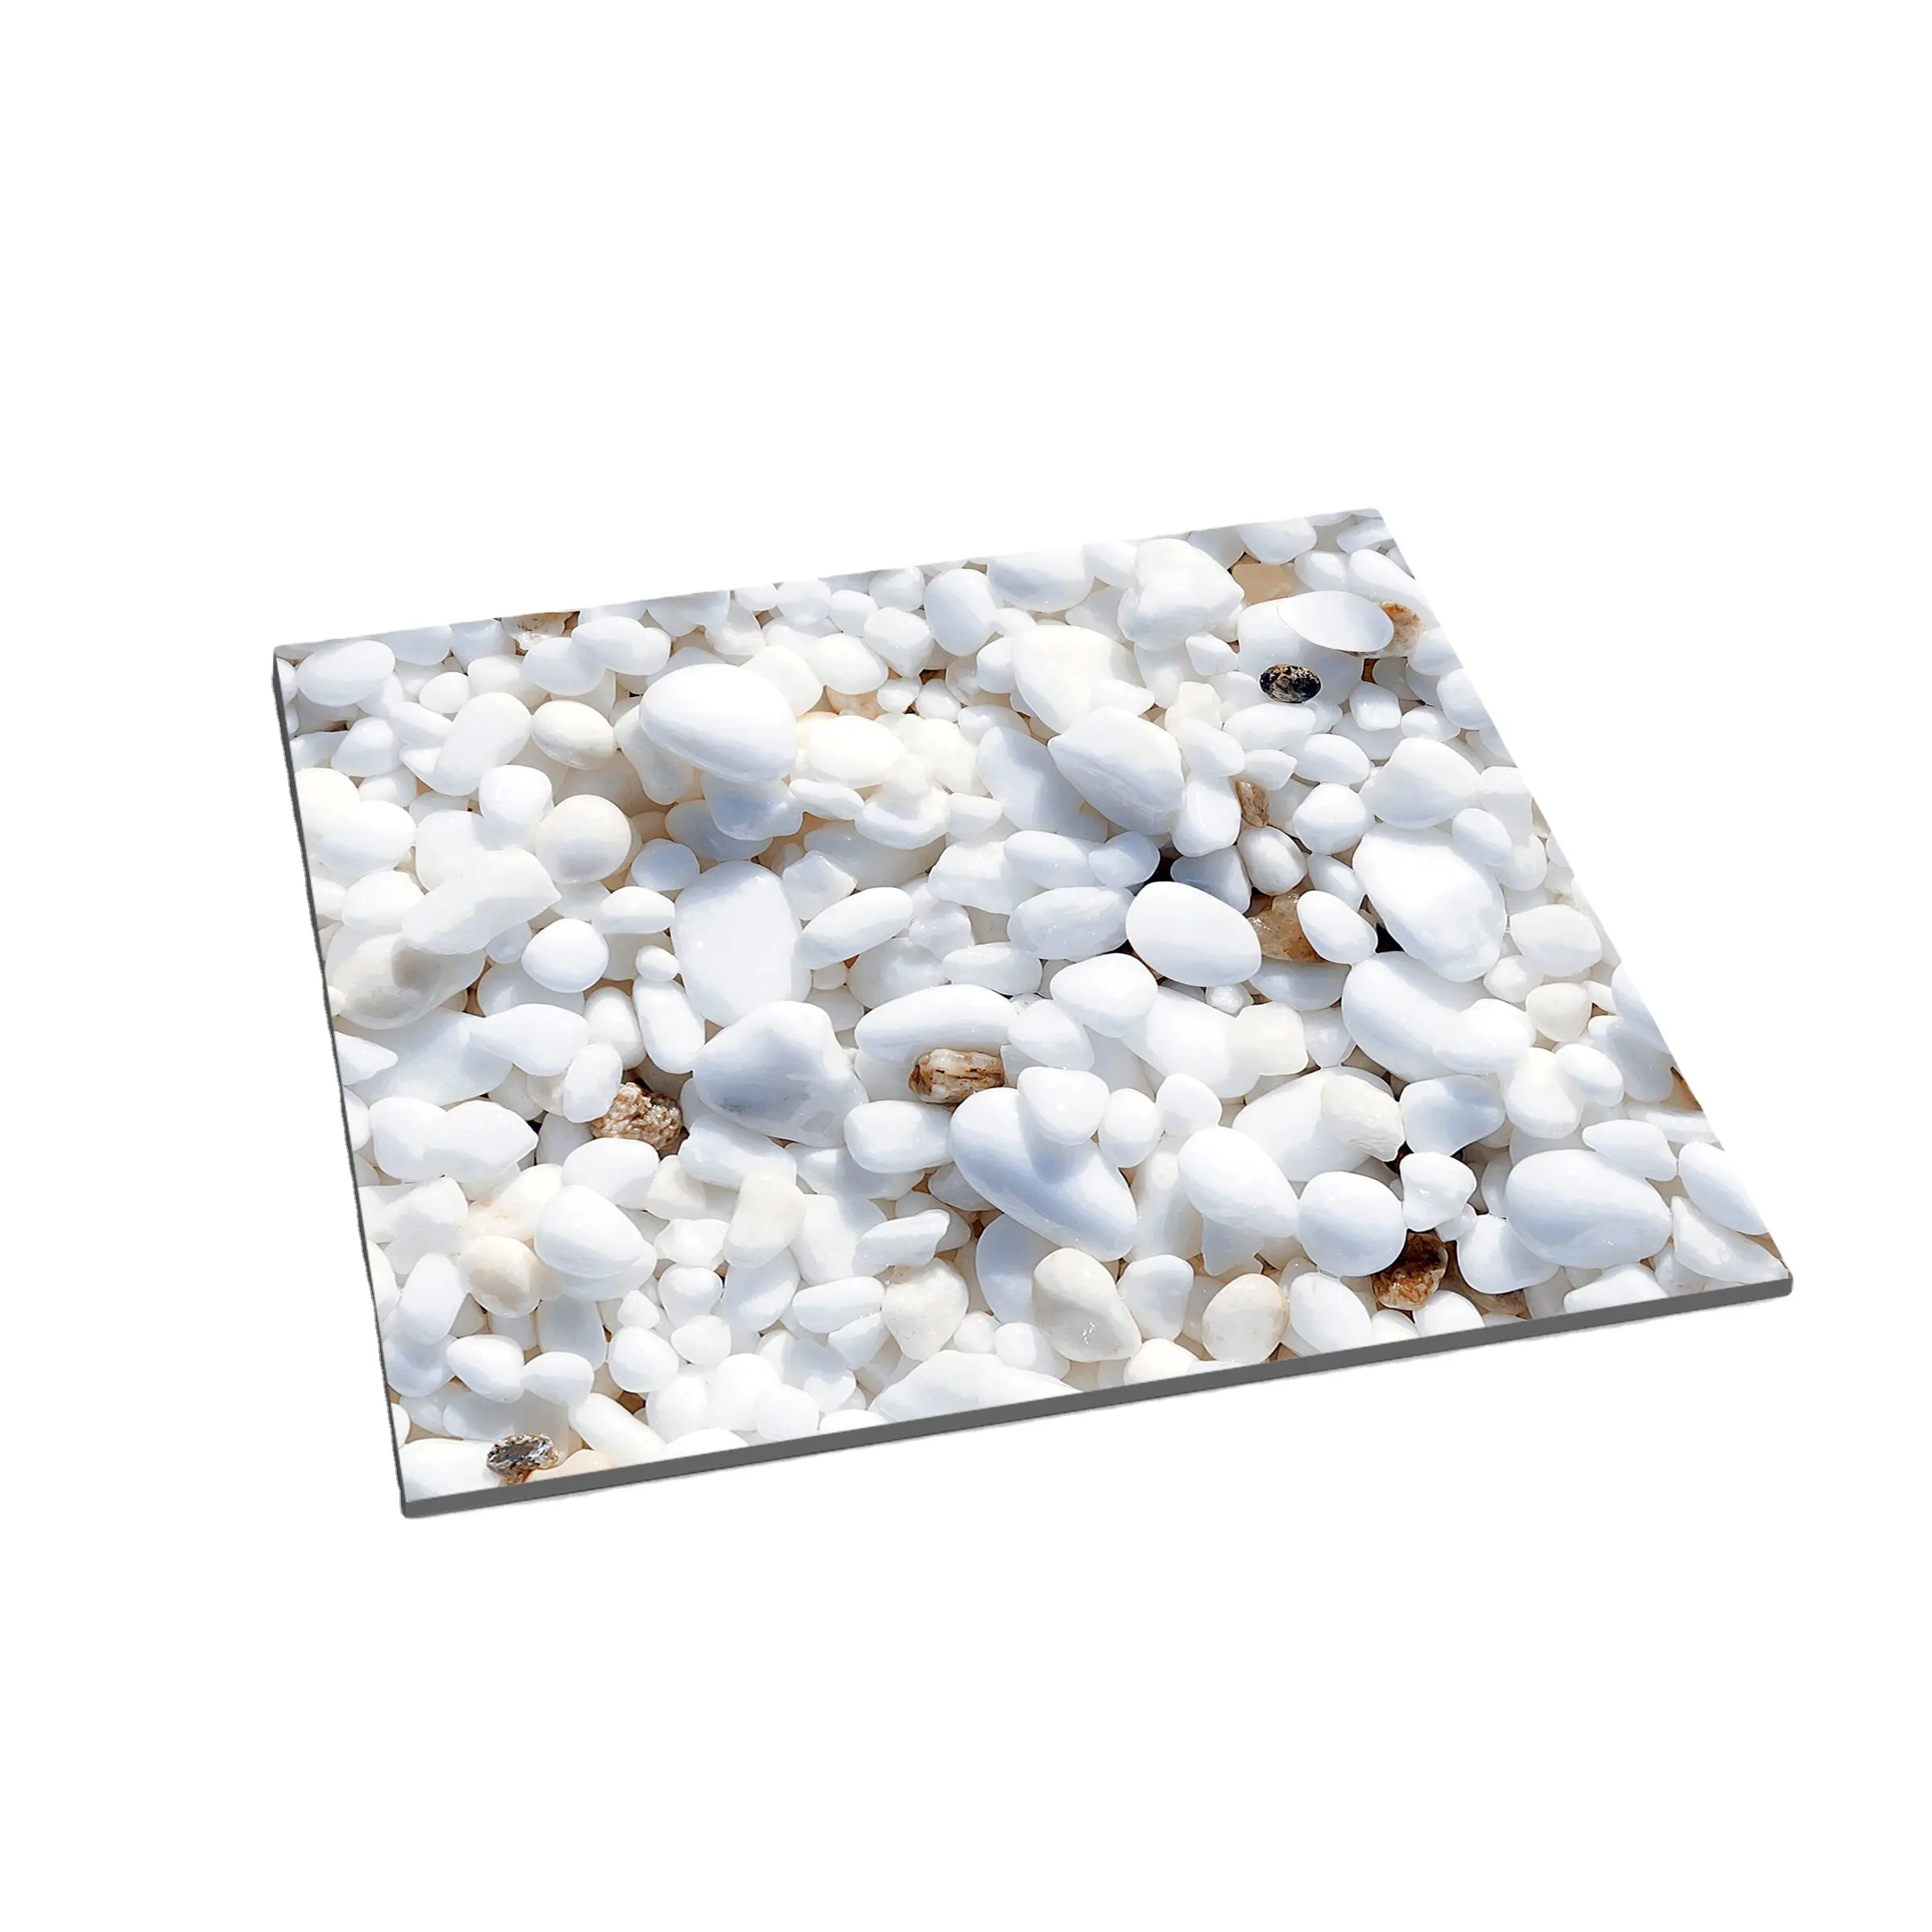 Hot selling product 3D inkjet exterior ceramic white and ivory floor tile 600x600 rustic design for hotel project